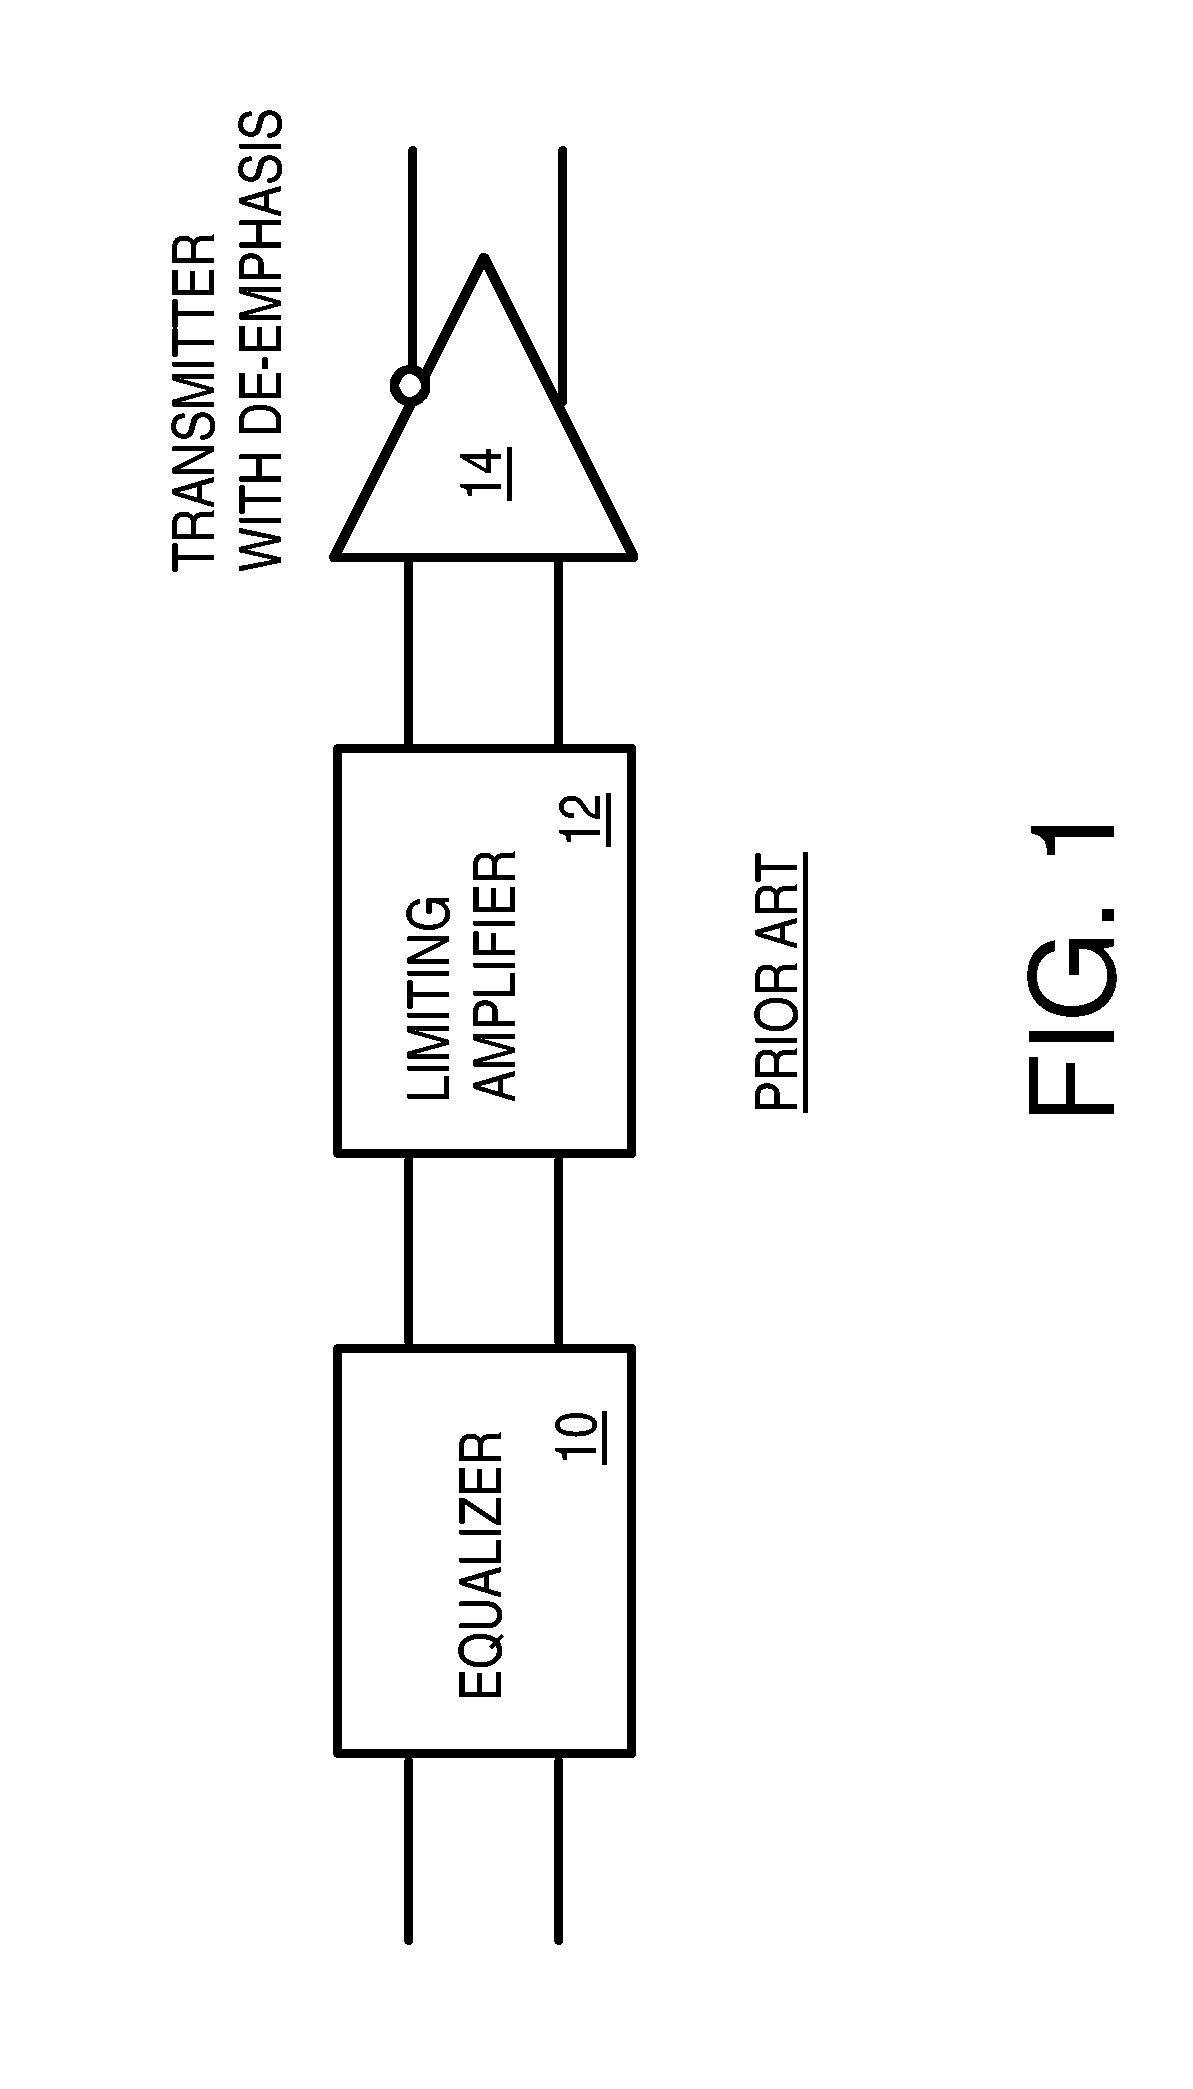 Wide-band high-gain limiting amplifier with parallel resistor-transistor source loads